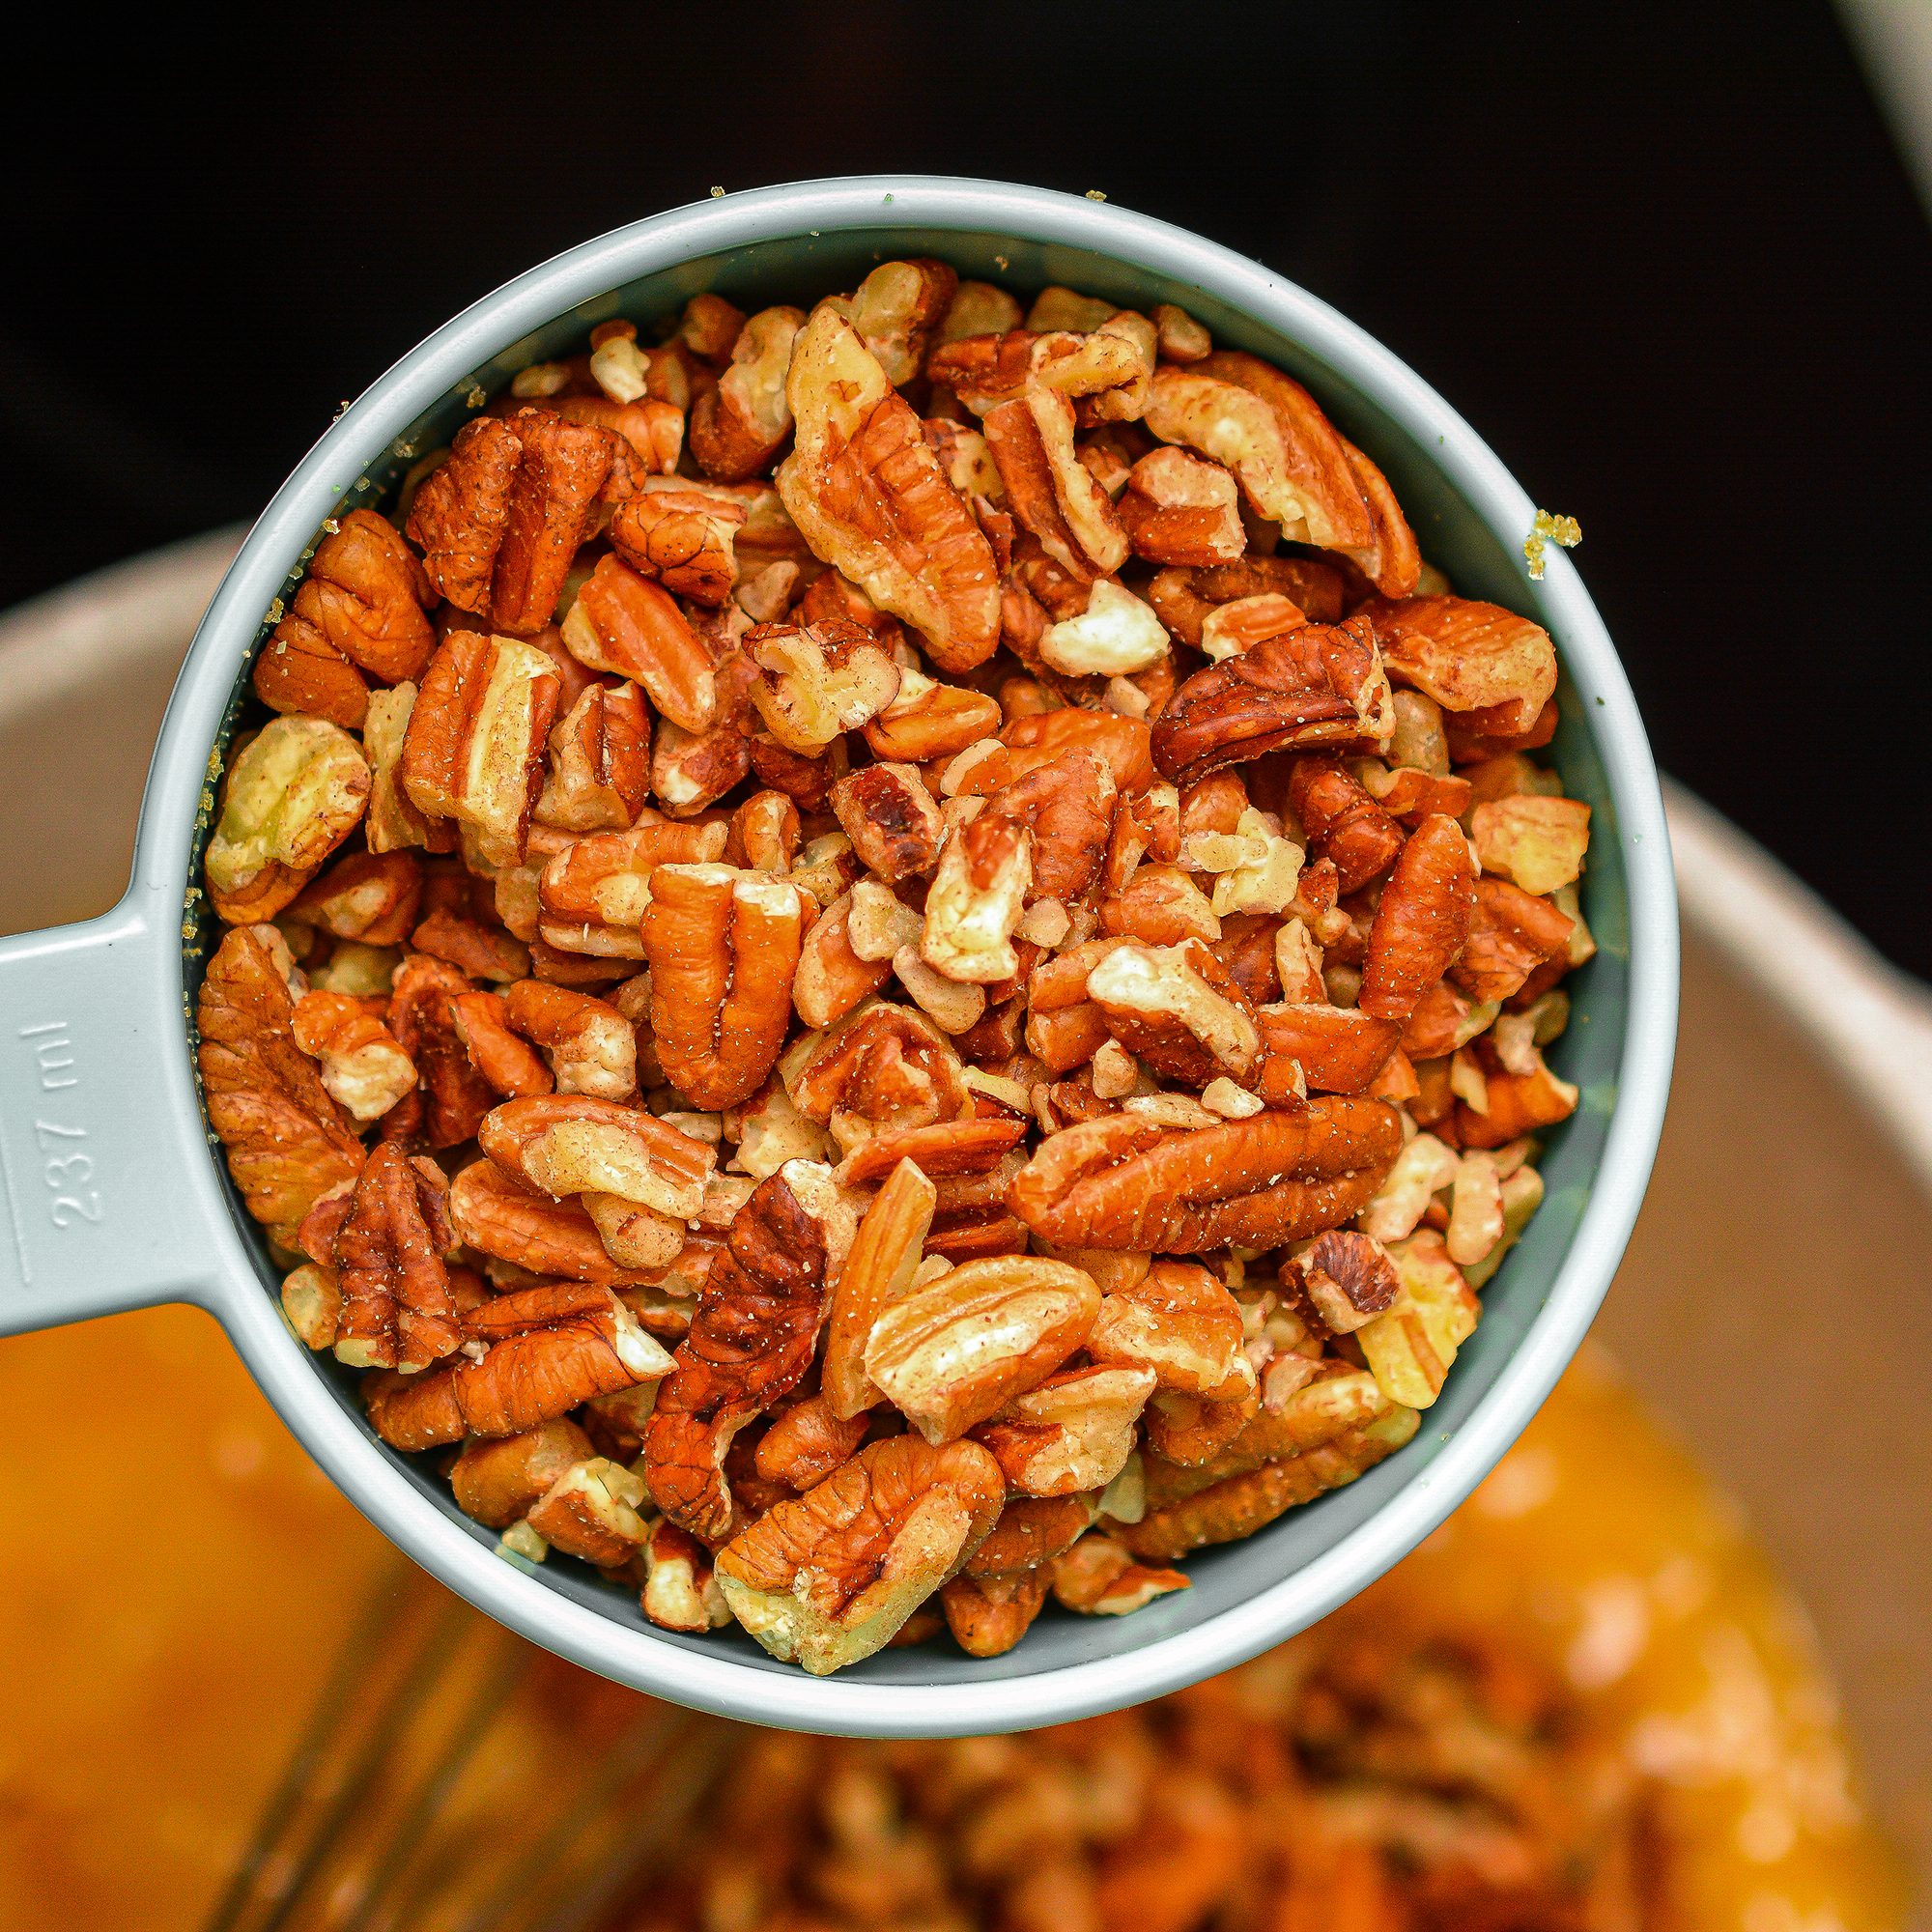 Remove the mixture from the heat and stir in the pecans.